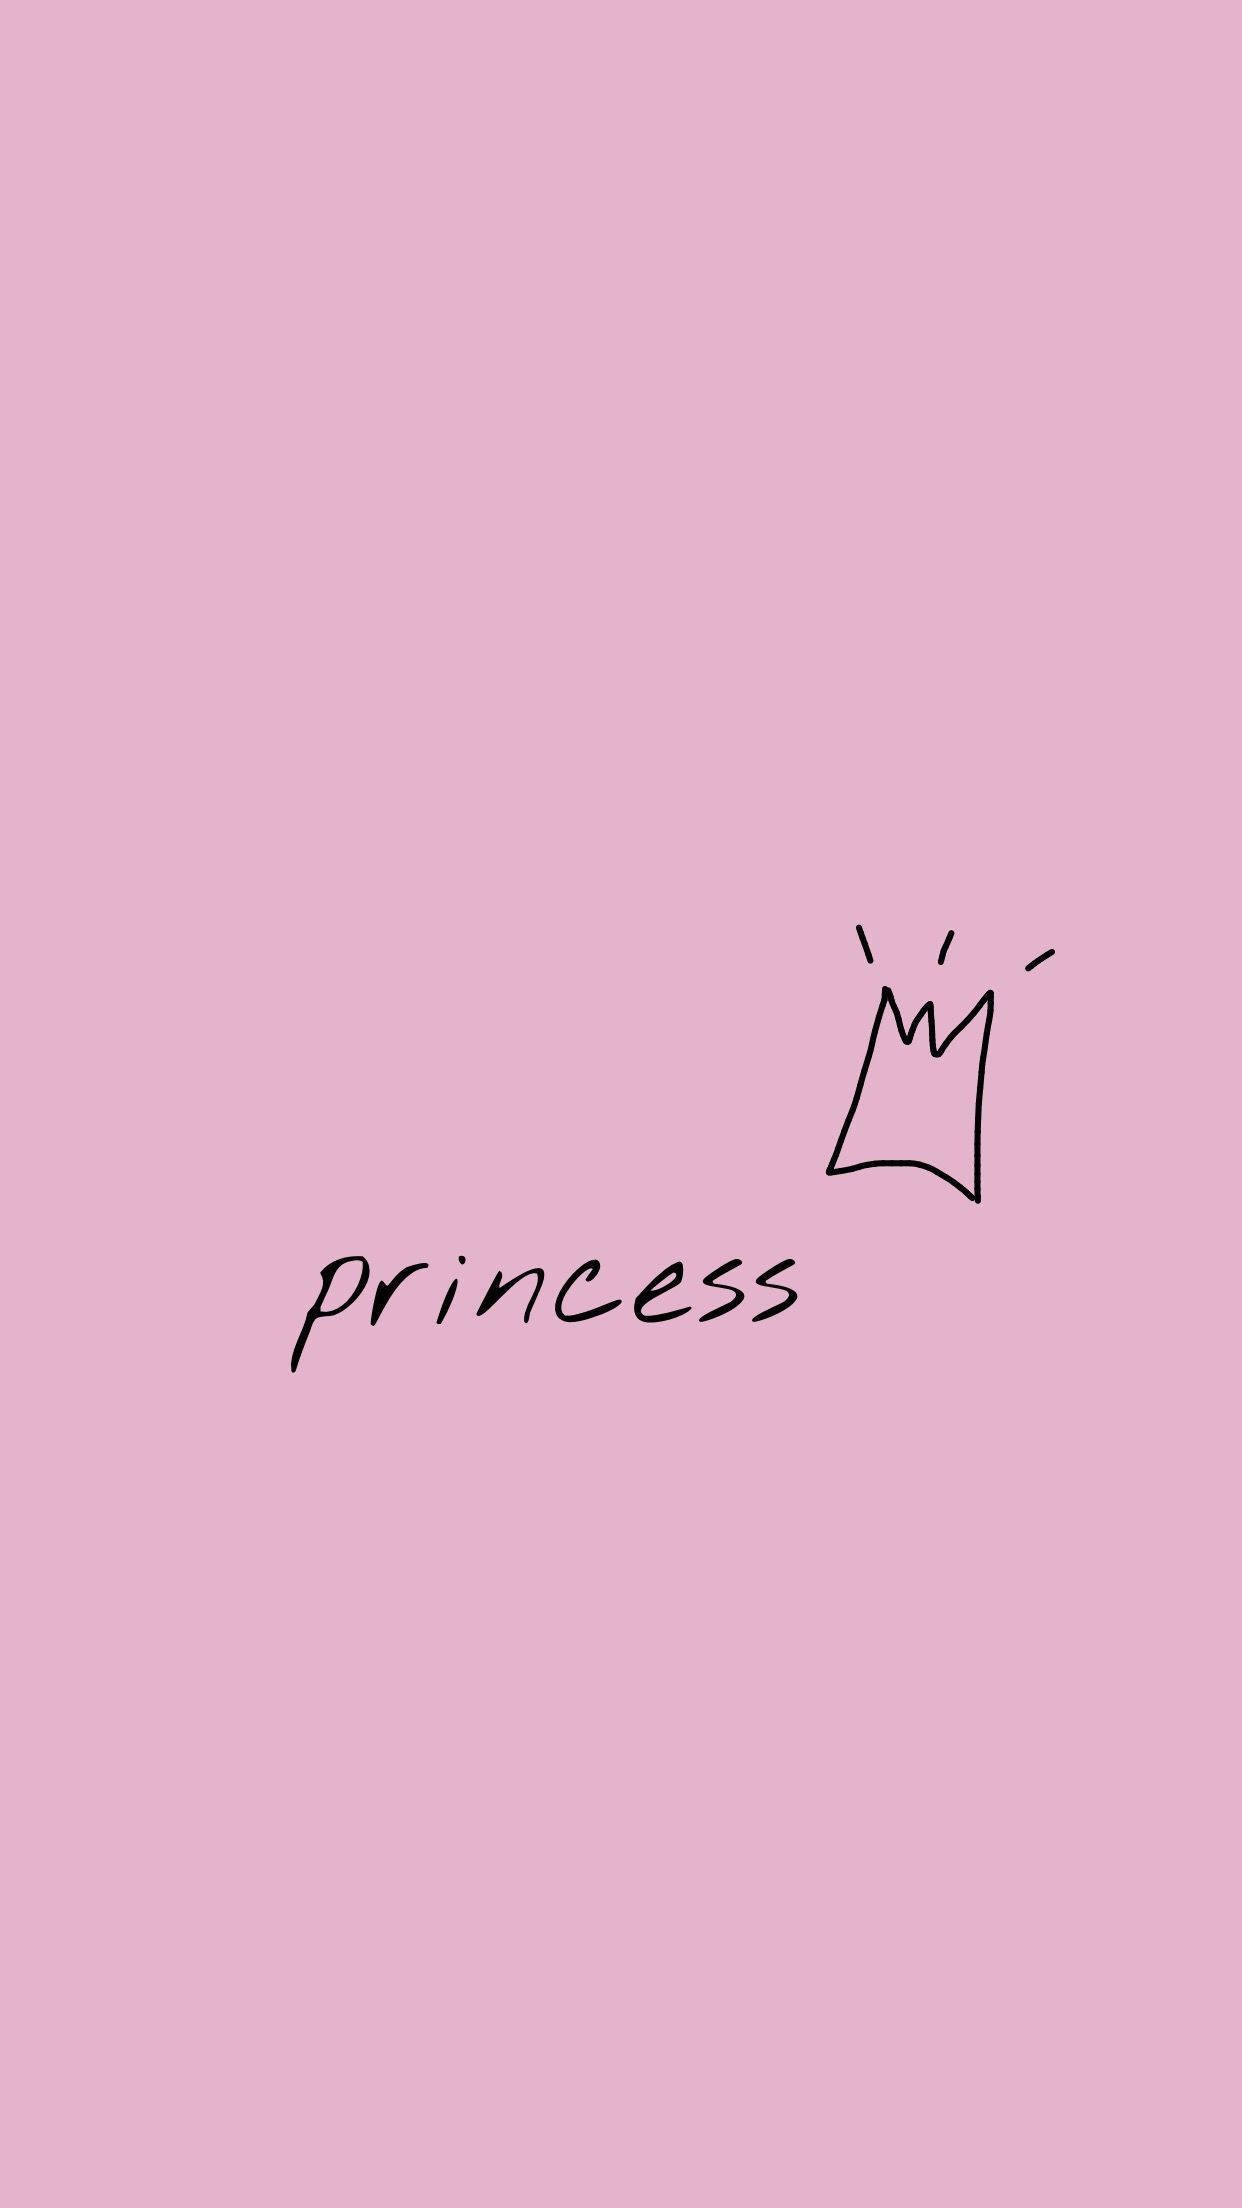 The princess logo on a pink background - Crown, princess, cute pink